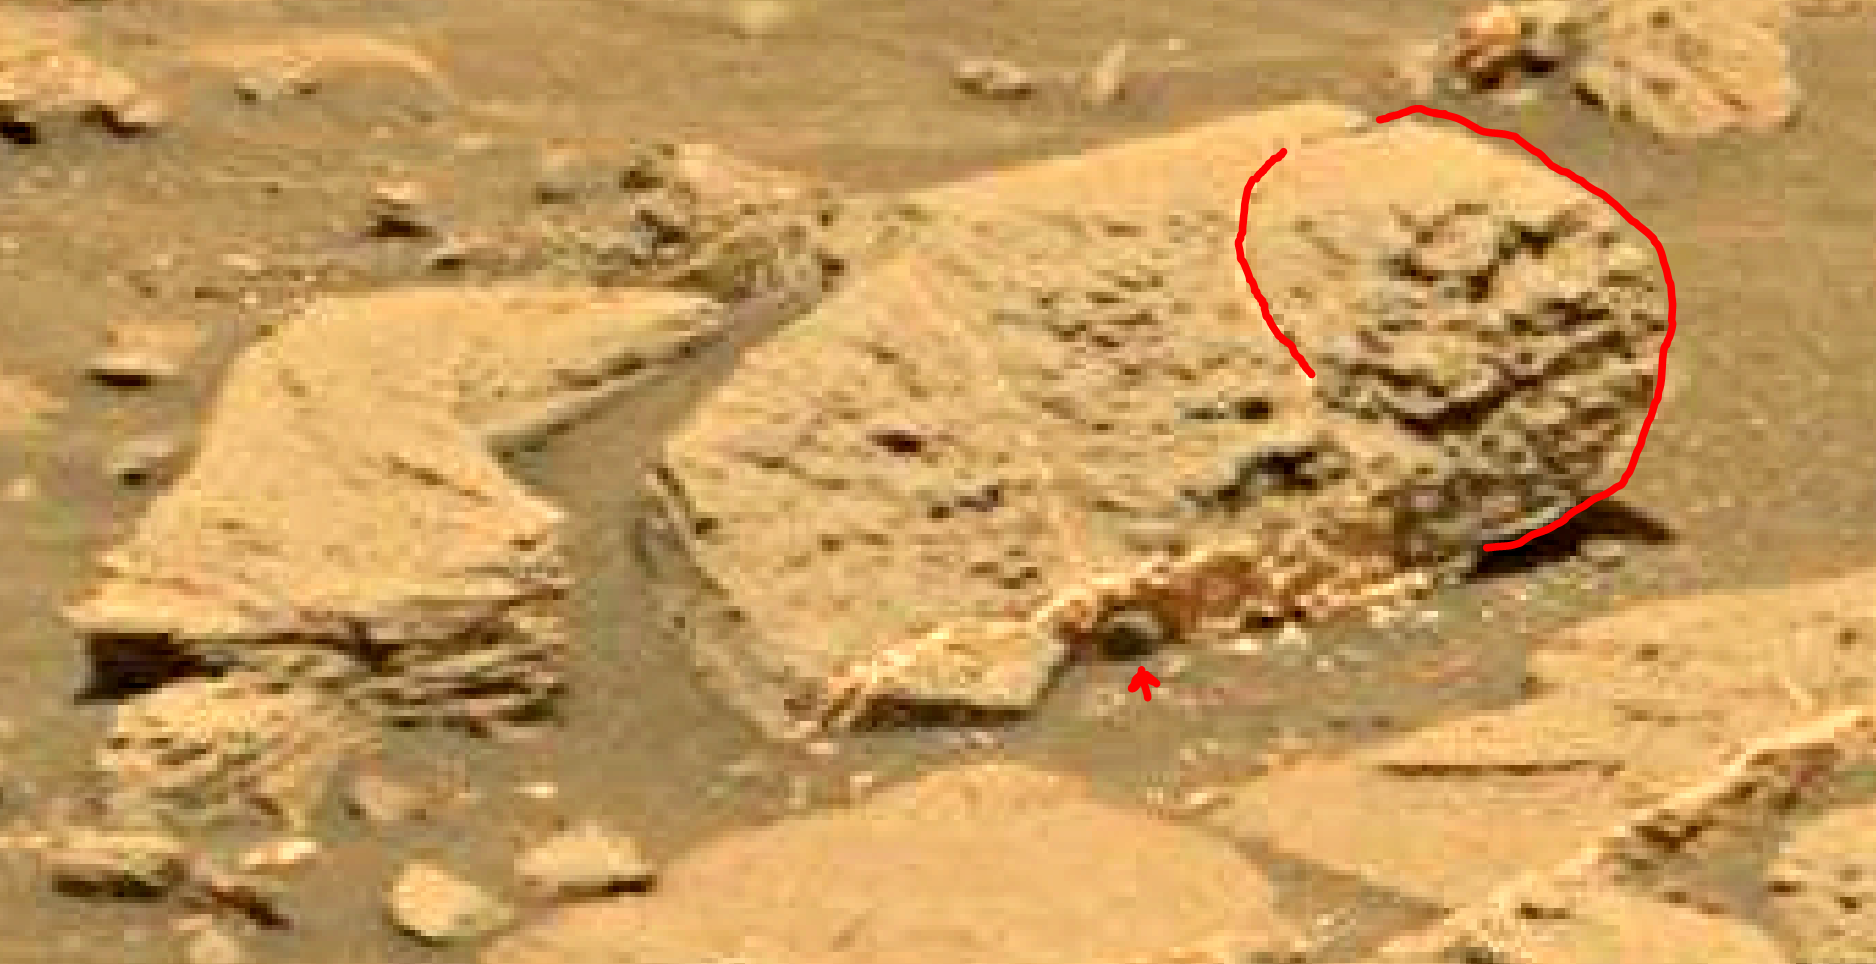 mars sol 1353 anomaly-artifacts 23a was life on mars